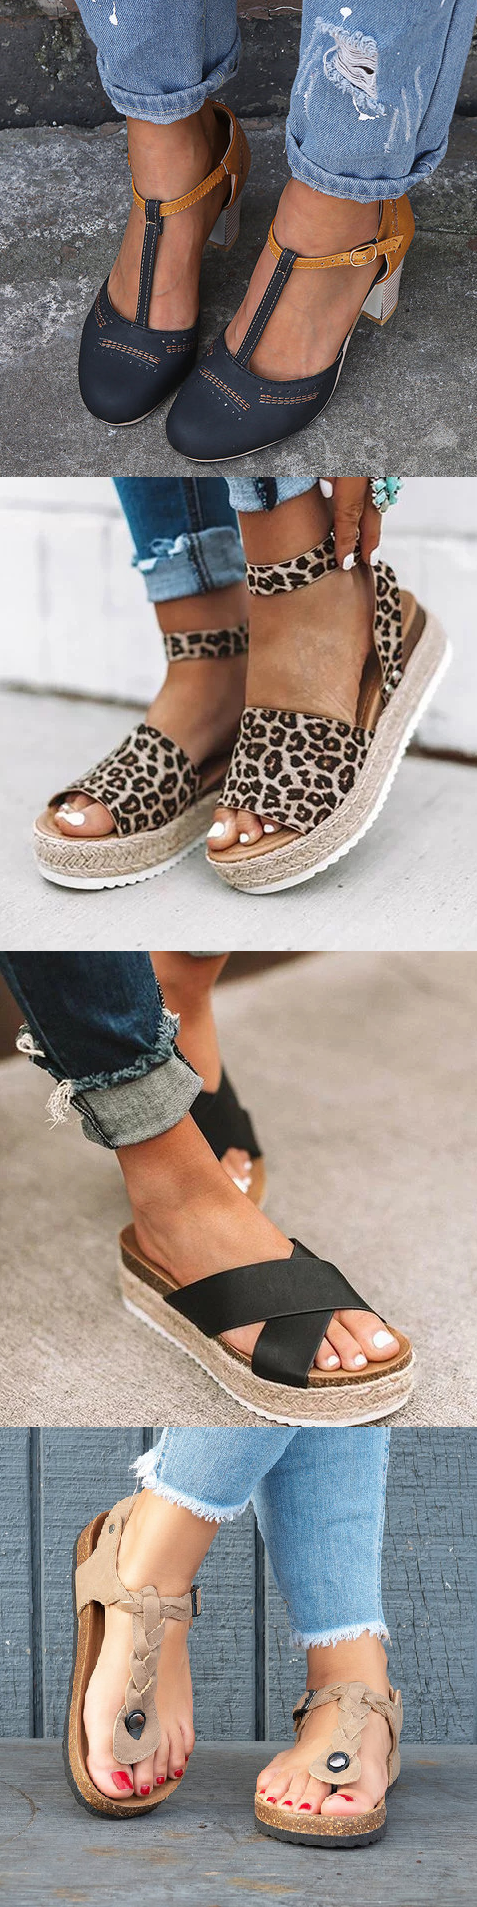 рџ›’Shop Now>> Up to 75% OFFрџЊ№ Buy More Save MoreрџЊ№ 100+ 2019 Best Spring Summer Sandals for You.Best Gifts for Herрџ’‹рџ’‹ -   17 summer beach style
 ideas